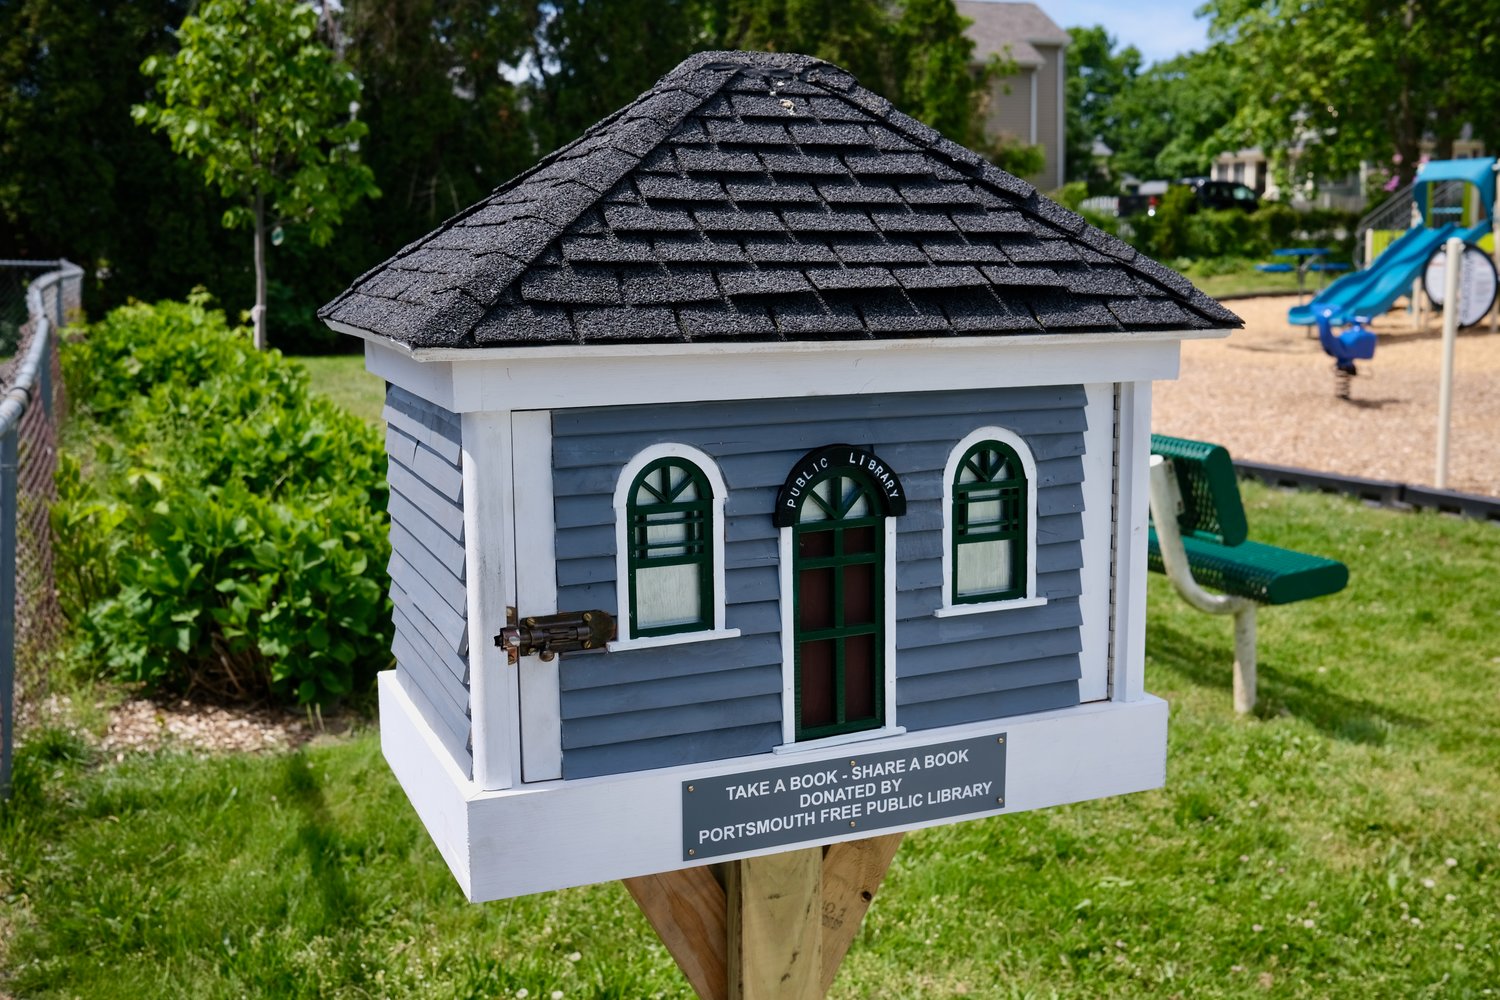 The Portsmouth Free Public Library recently donated this little library, which can be found at the entrance to the Island Park Playground on Ormerod Avenue. It was built by Paul Shoenbucher and installed by the Department of Public Works.